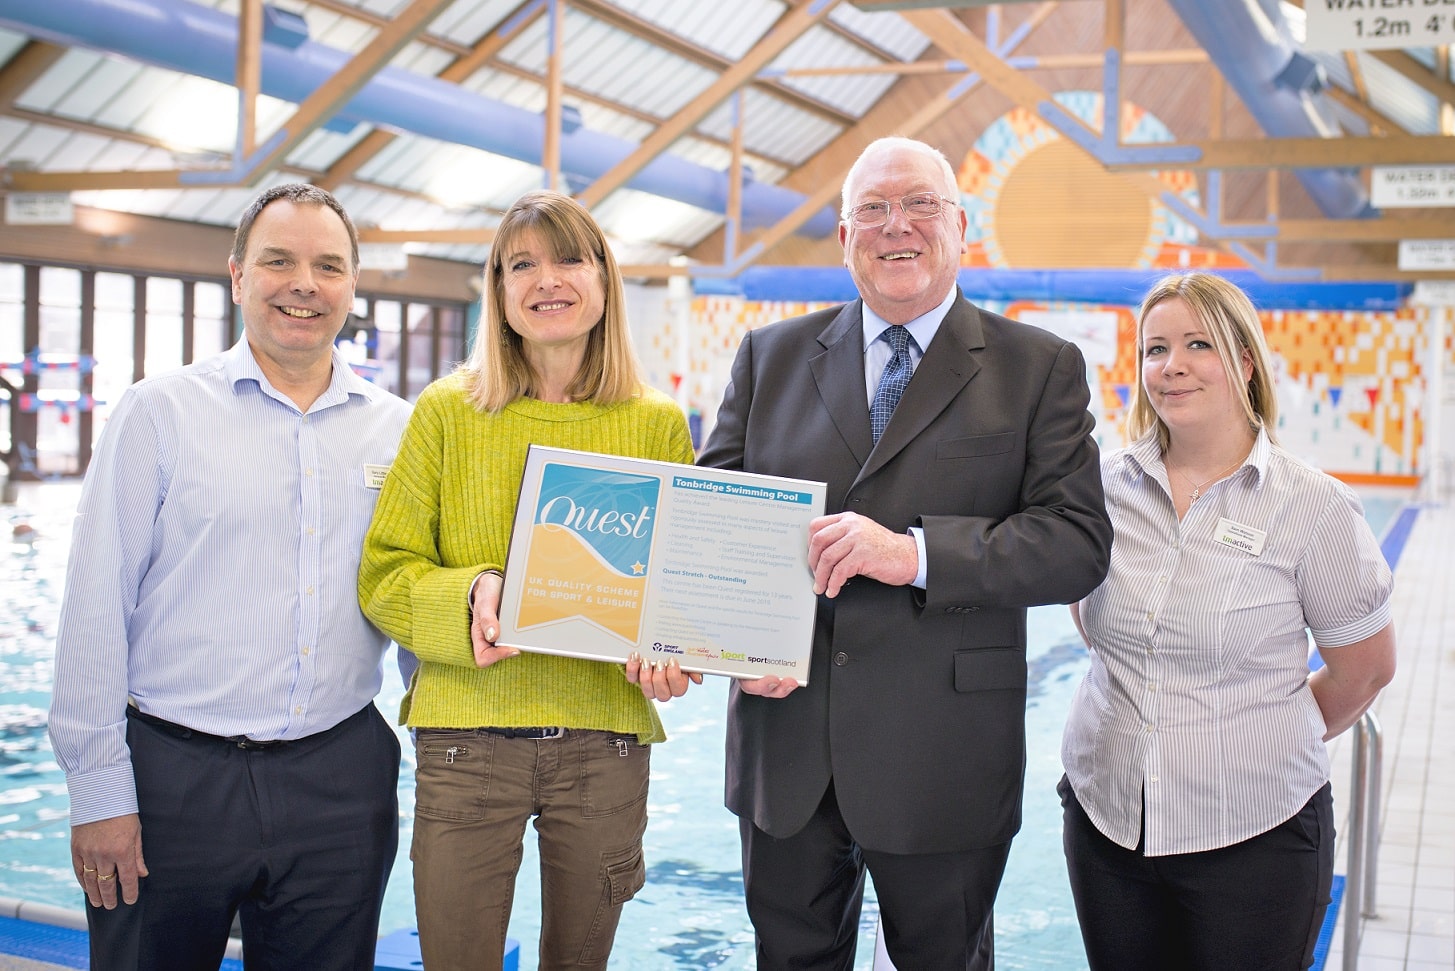 It's all going swimmingly as TonbridgeÂ pool scoops second outstanding award